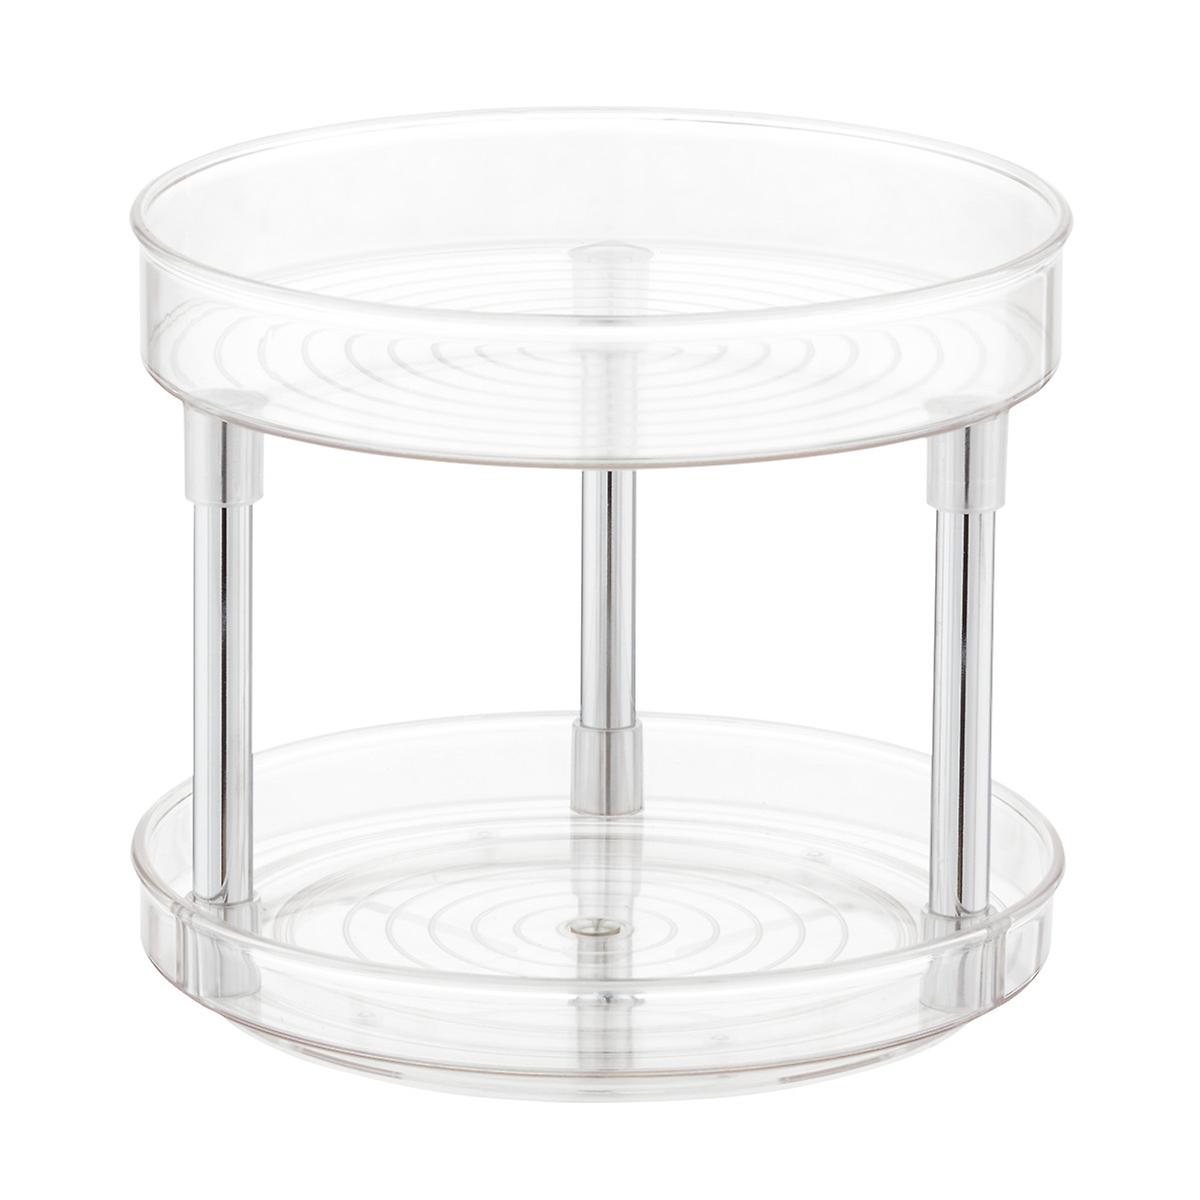 Idesign Linus 2 Tier Lazy Susan The Container Store